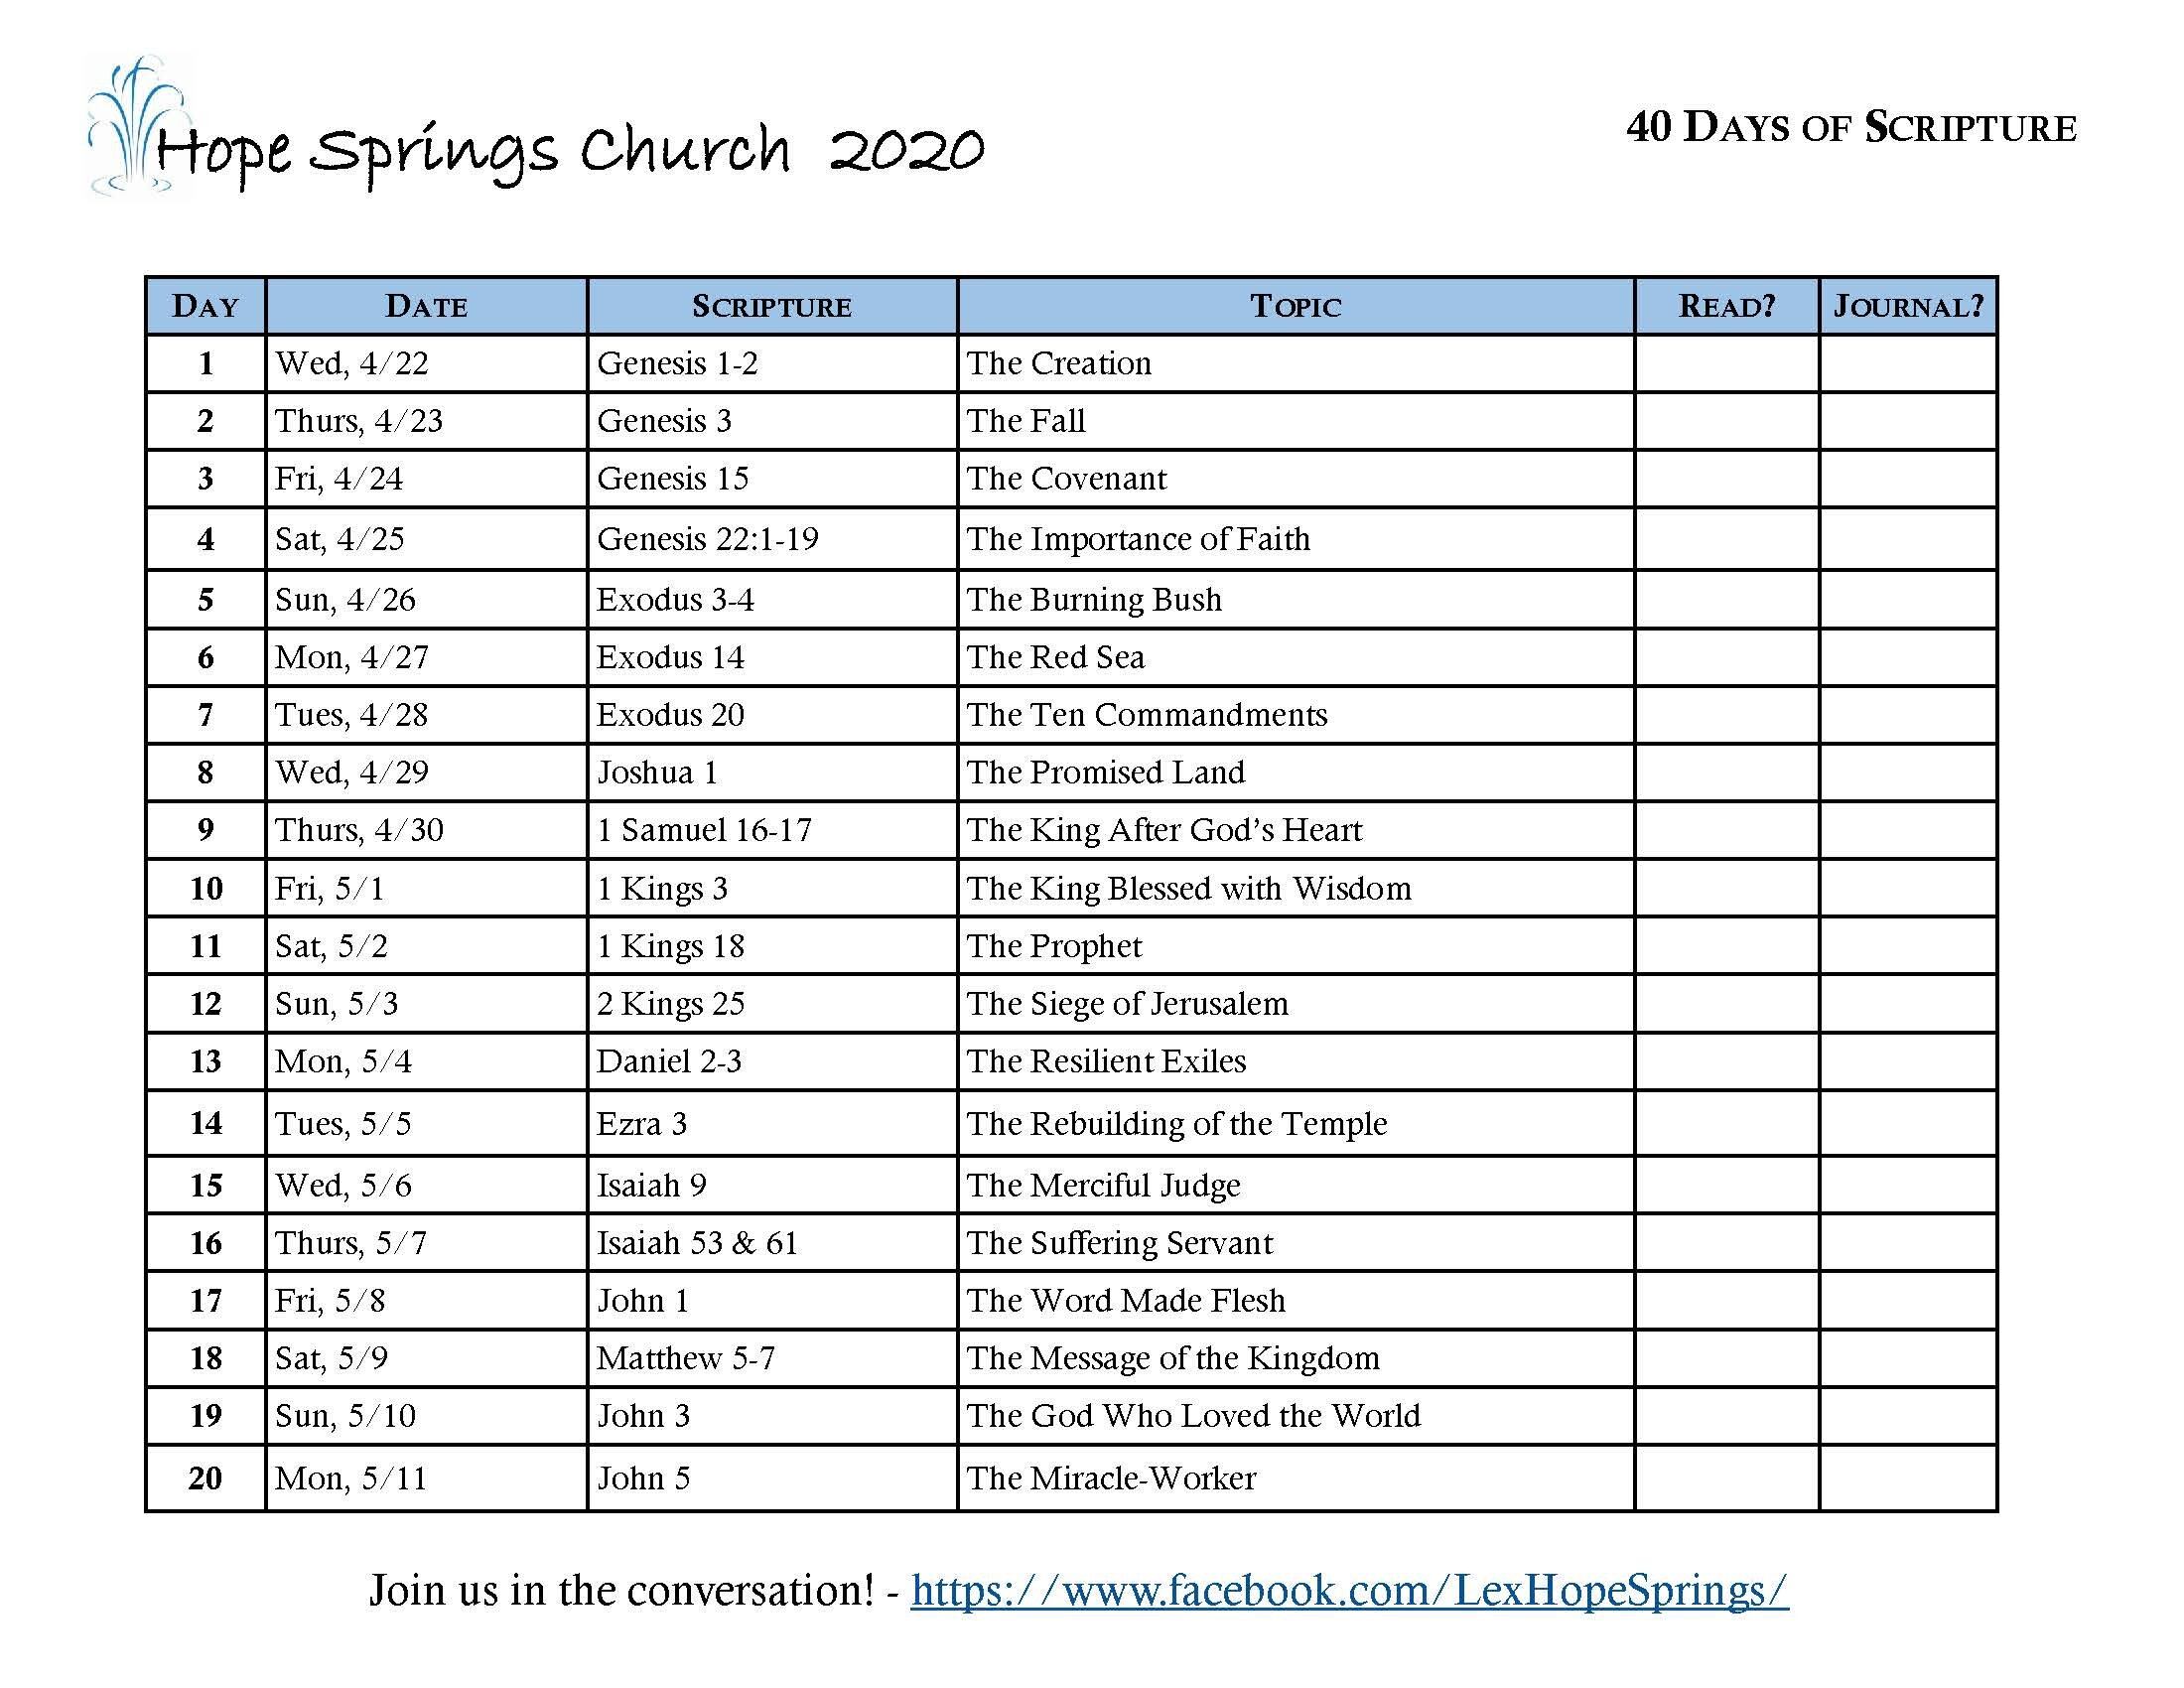 40 Day Scriptures_Page_1.jpg